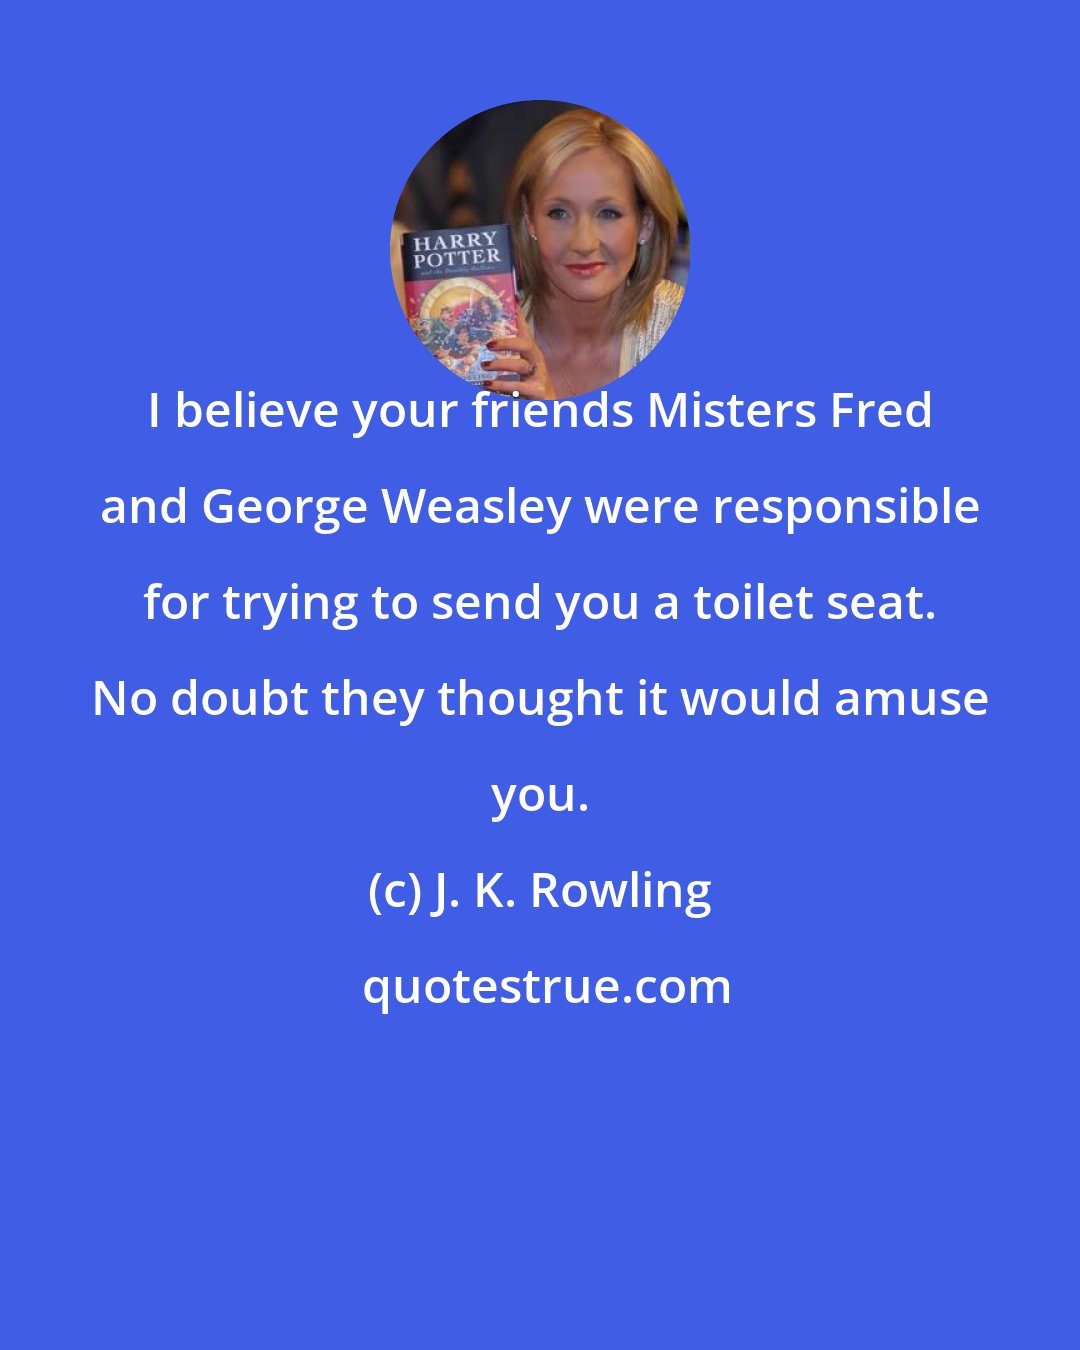 J. K. Rowling: I believe your friends Misters Fred and George Weasley were responsible for trying to send you a toilet seat. No doubt they thought it would amuse you.